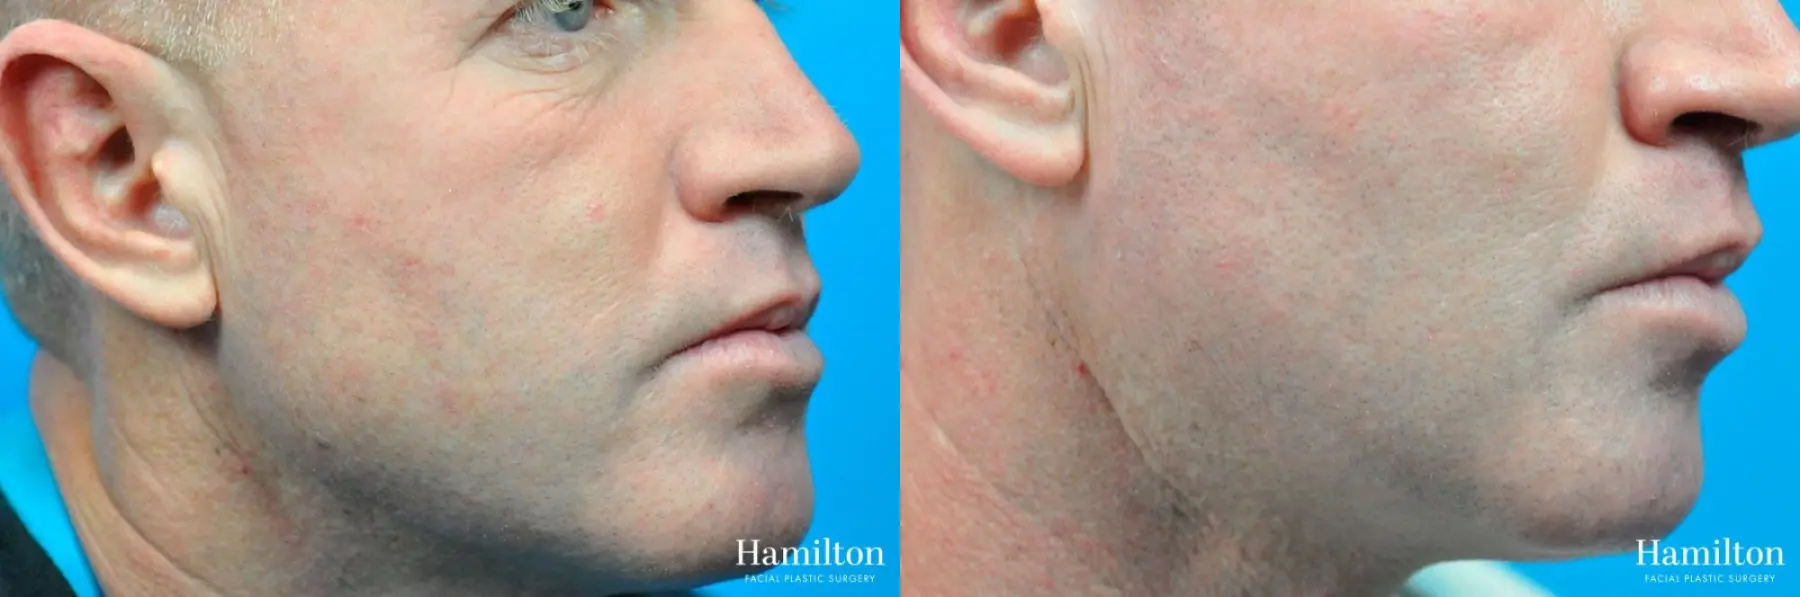 Fractional Resurfacing: Patient 1 - Before and After 3